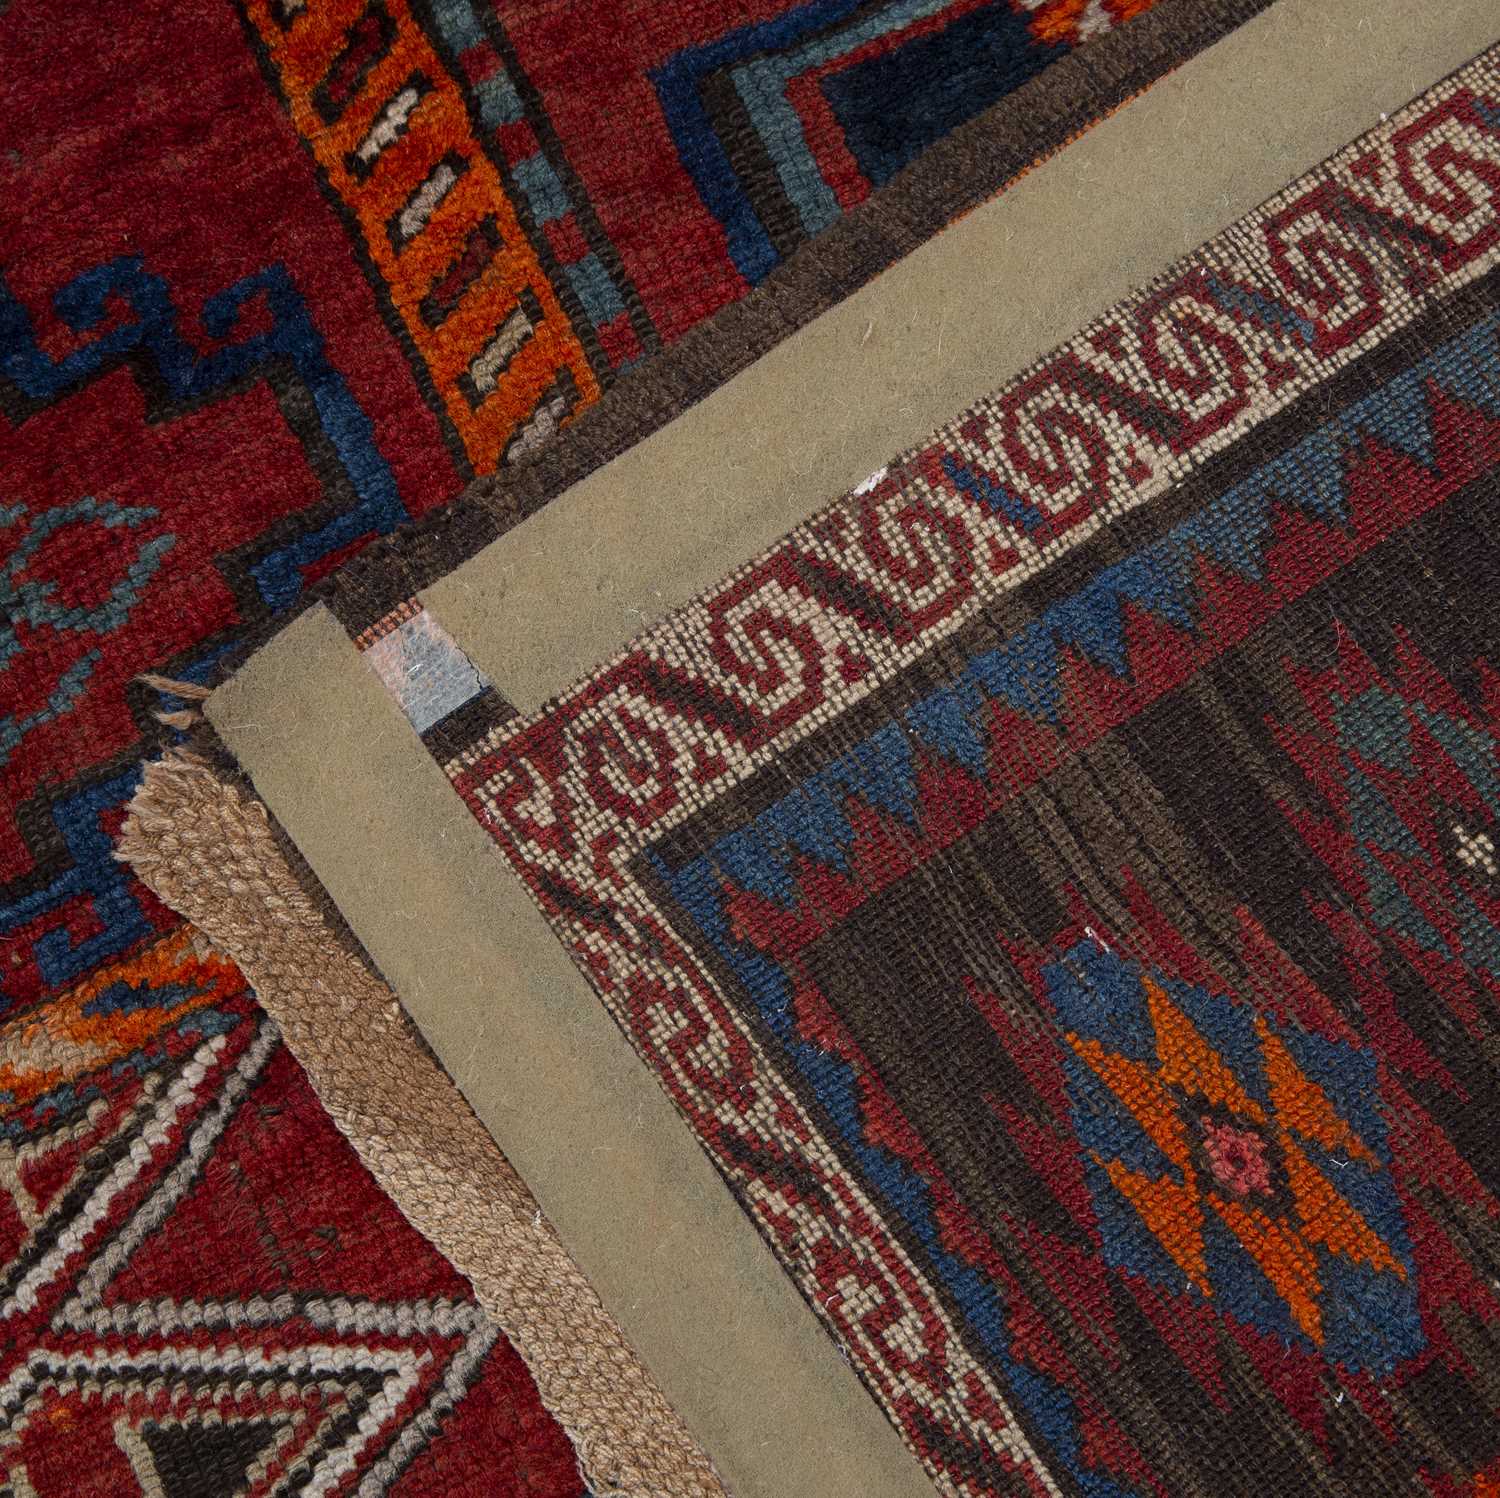 A Kasak polychrome rug with six central hooked medallions within a multiple border, 253 x 156cm - Image 2 of 2